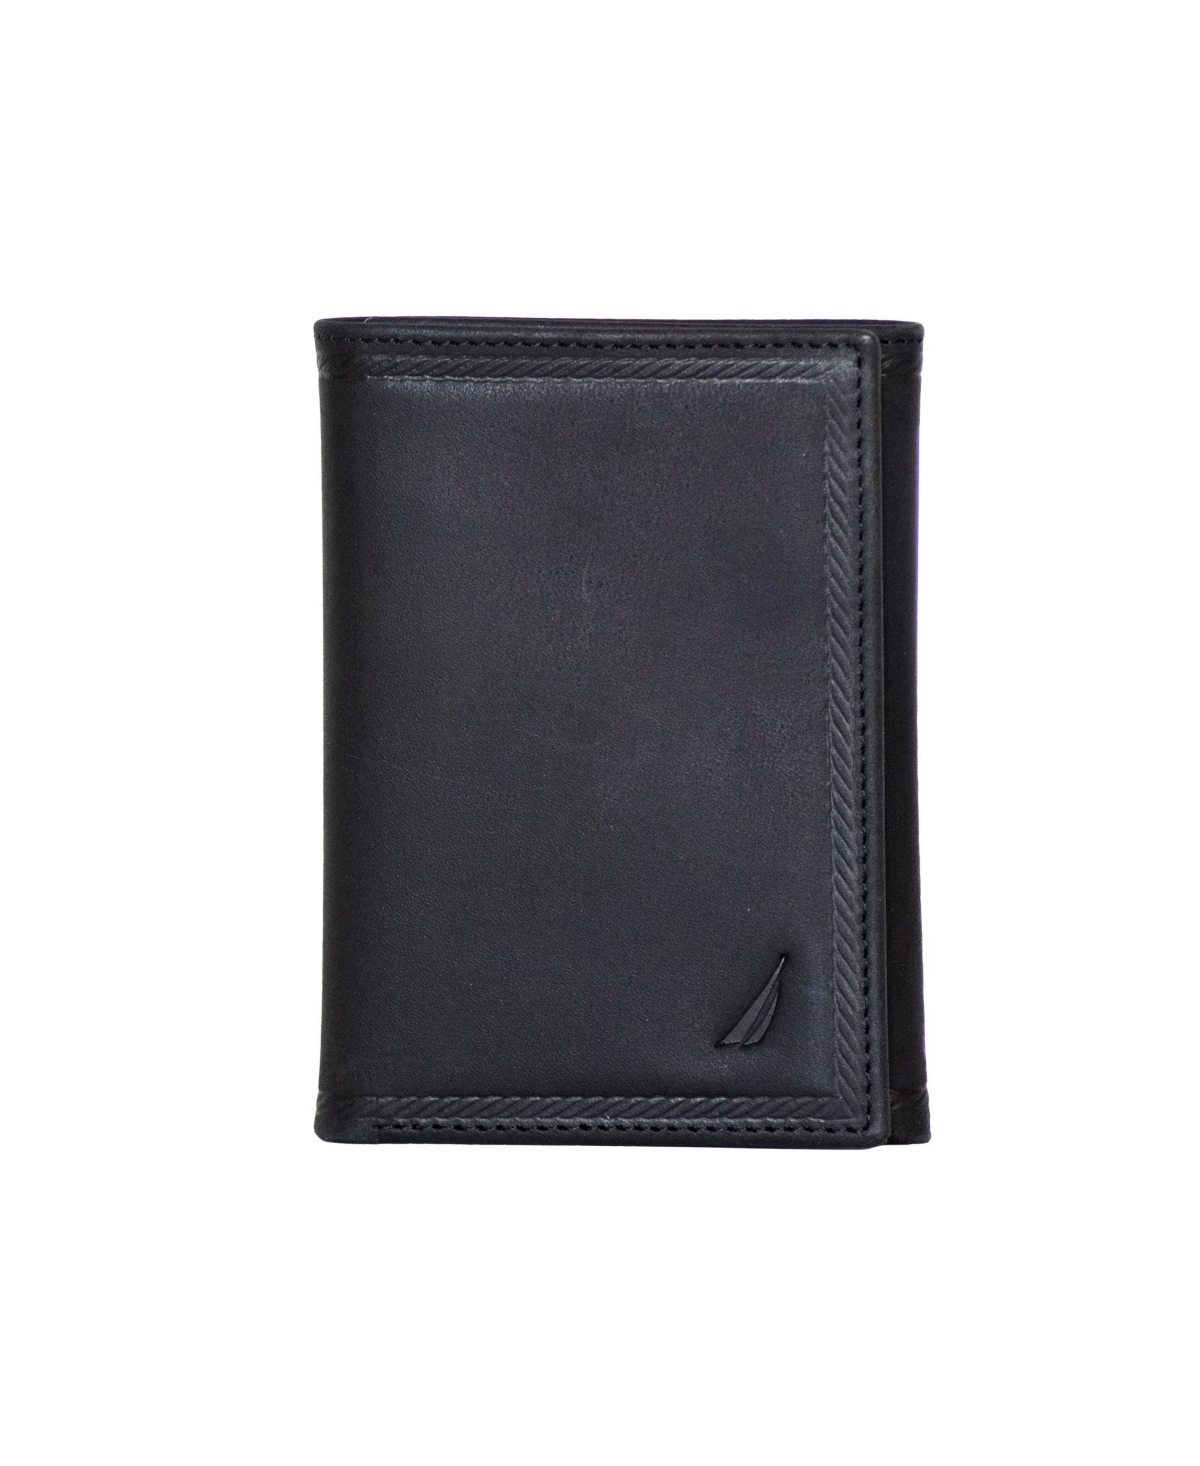 Nautica Men's Trifold Leather Wallet In Black